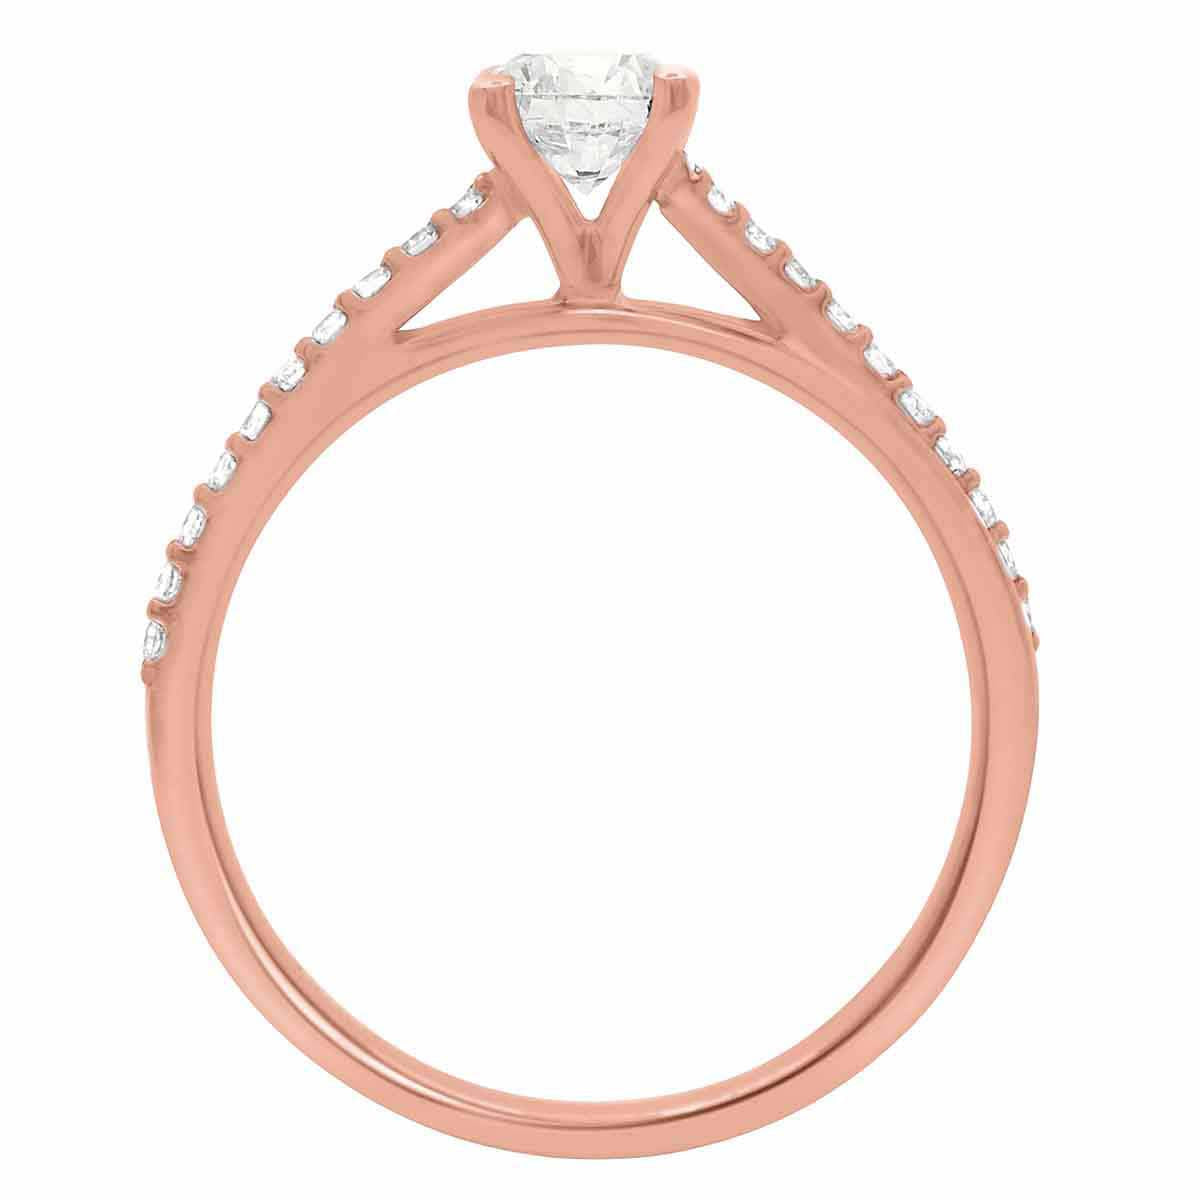 Debeers Promise Ring Style in rose gold with a plain wedding ring standing upright